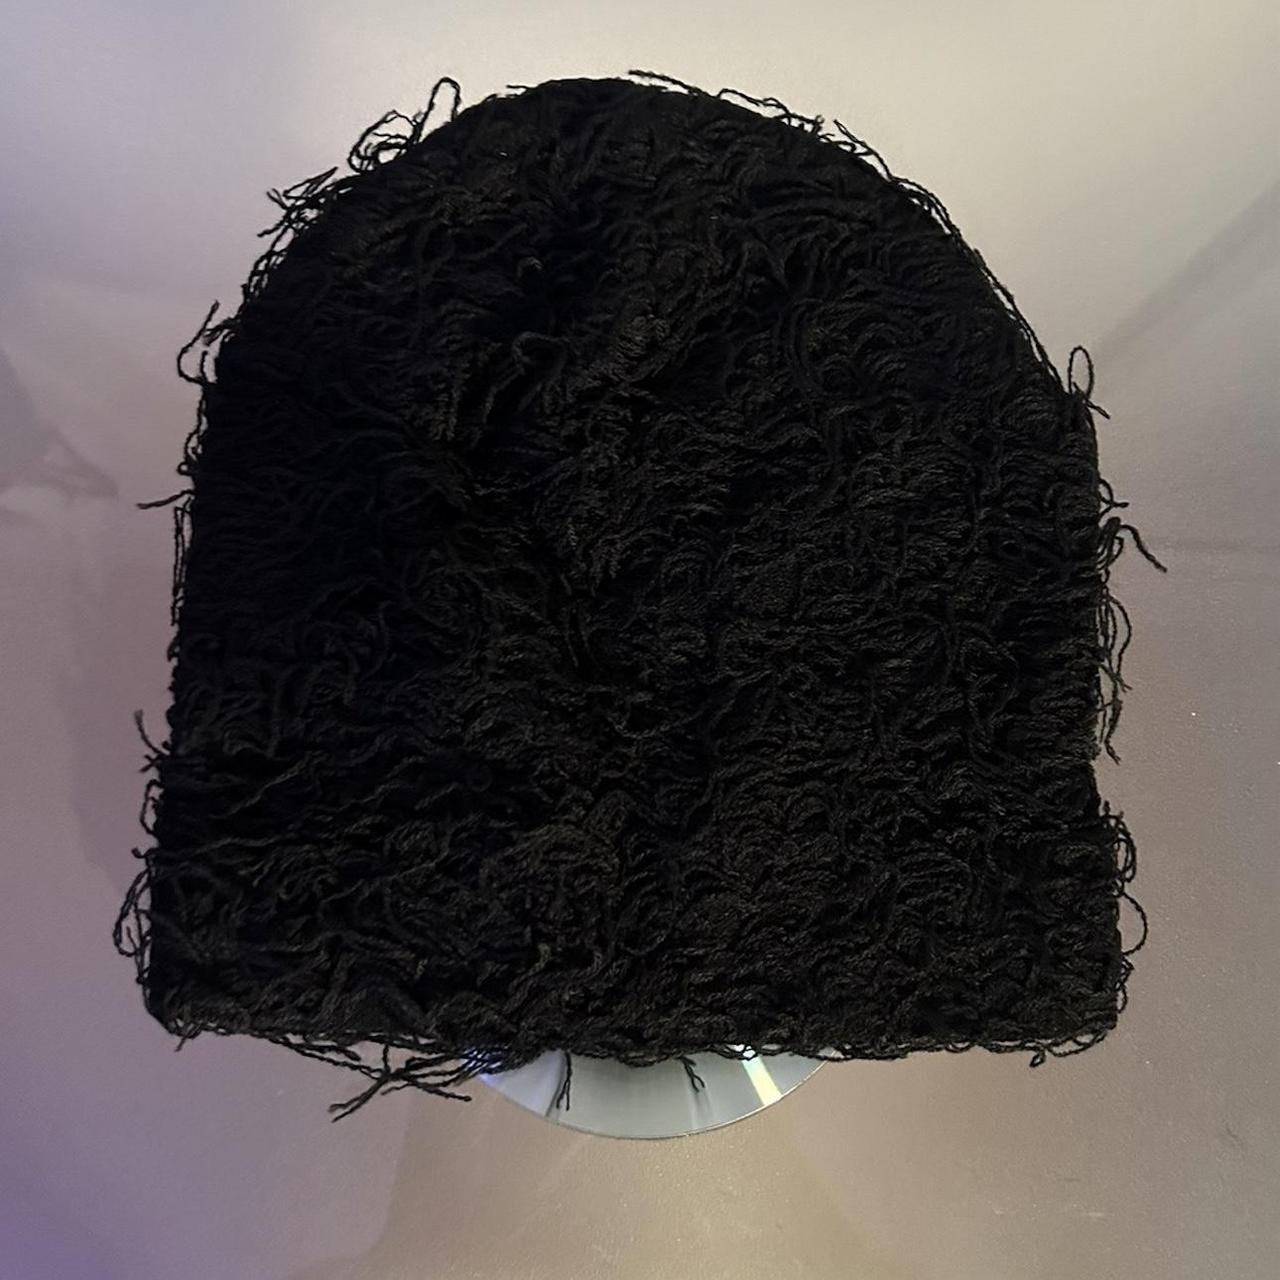 Distressed Knitted Yeat Type Beanie to ensure... - Depop